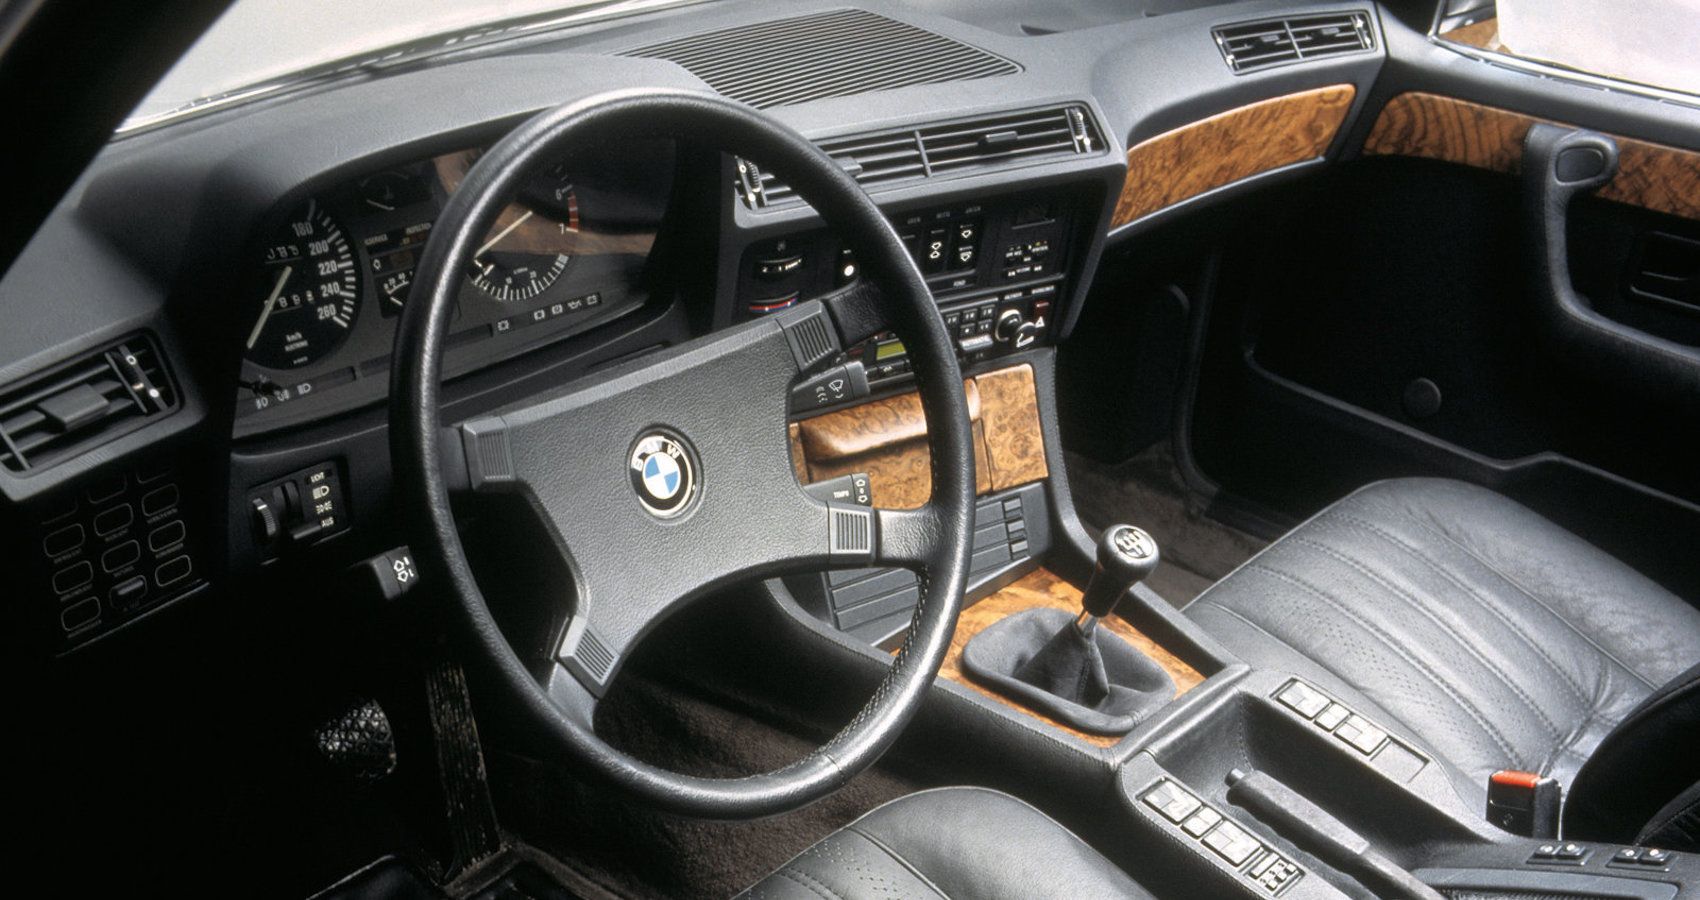 10 Classic Car Features No One Could Live Without (That Are Now Useless)